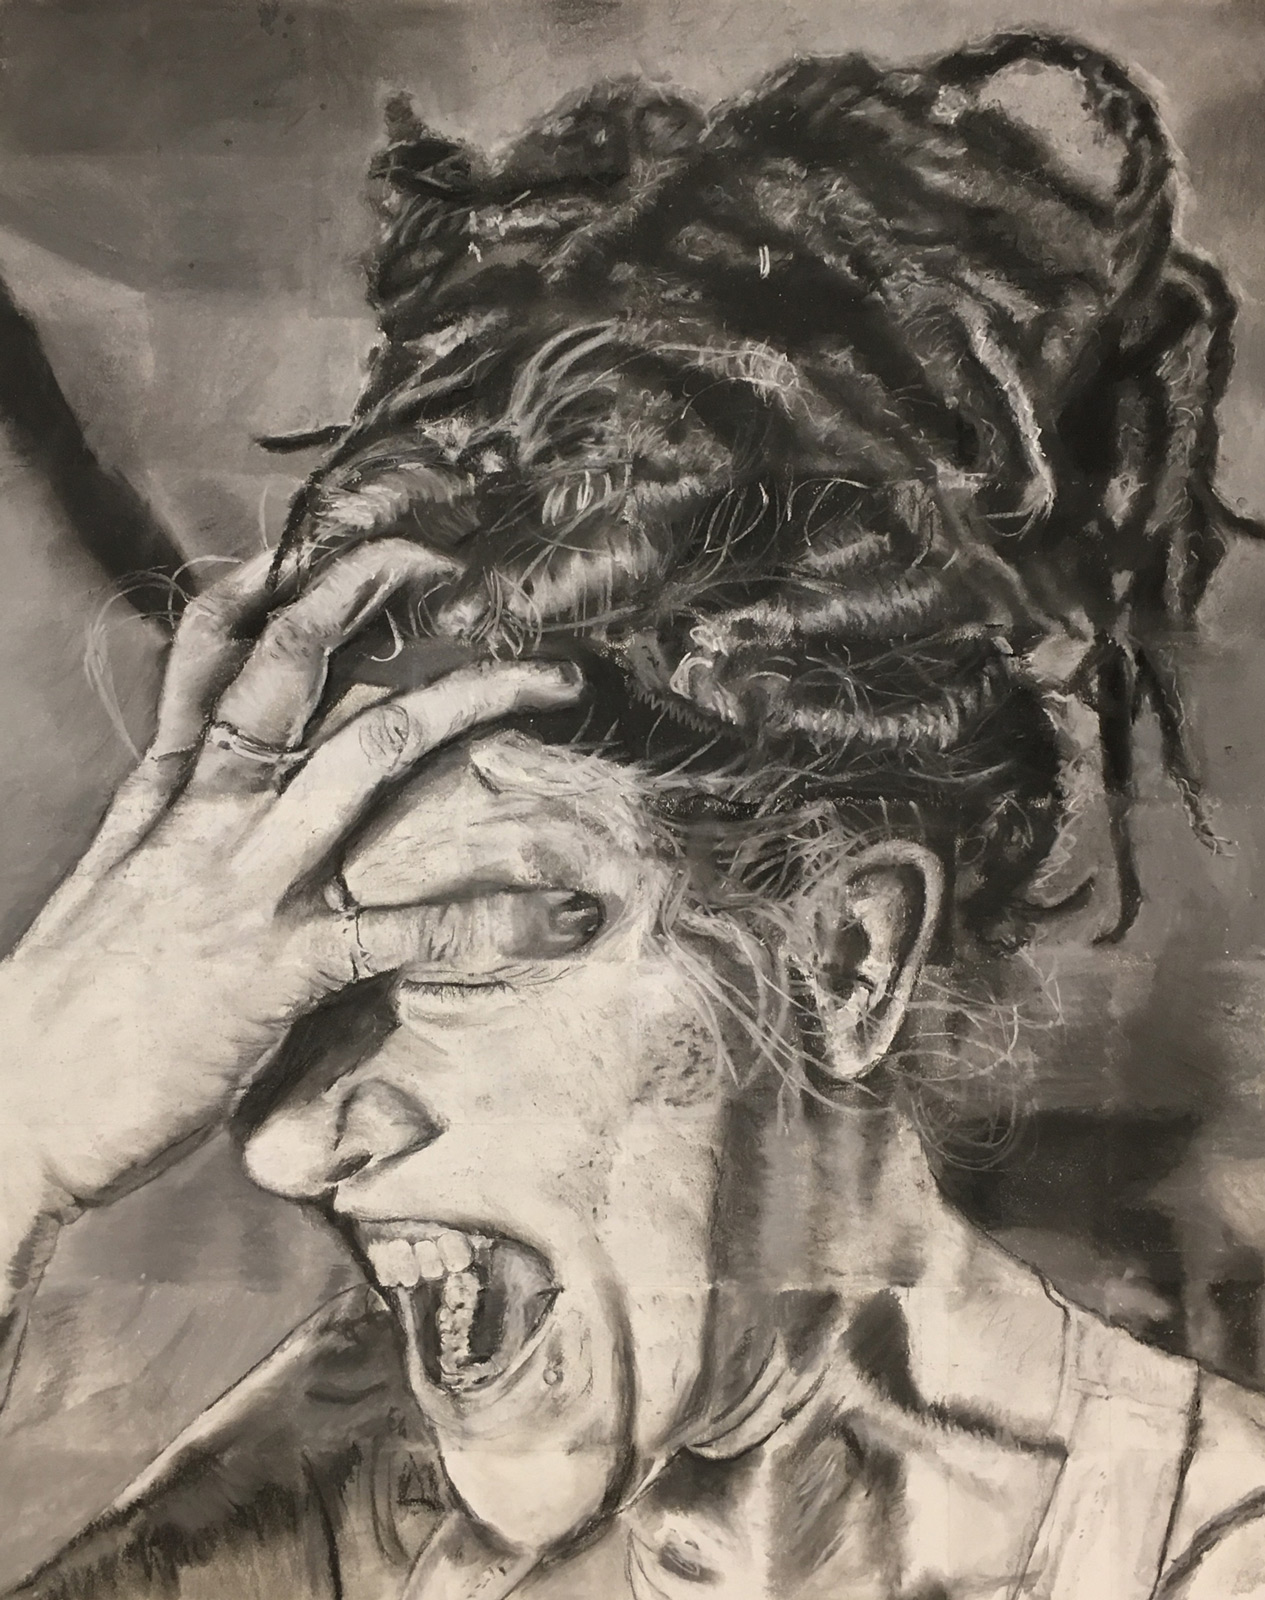 Self-portrait in charcoal on paper by an SVC art student